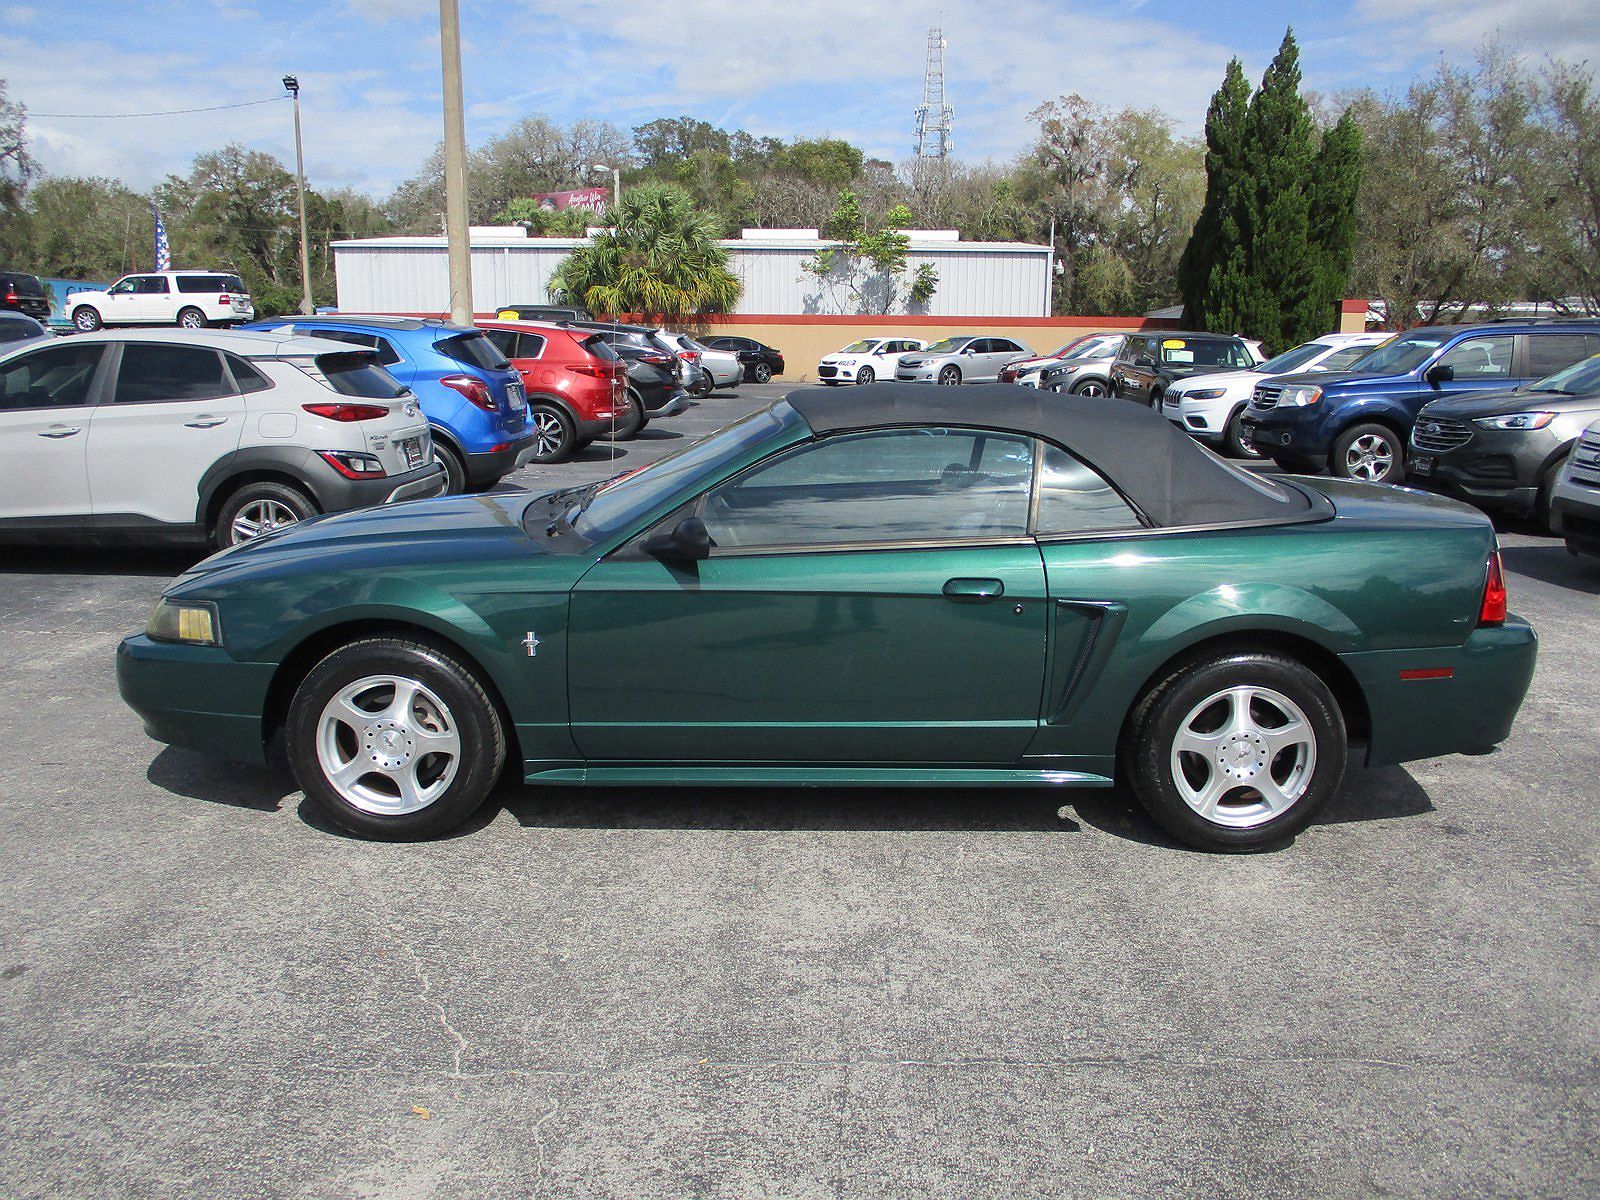 2003 Ford Mustang null image 1